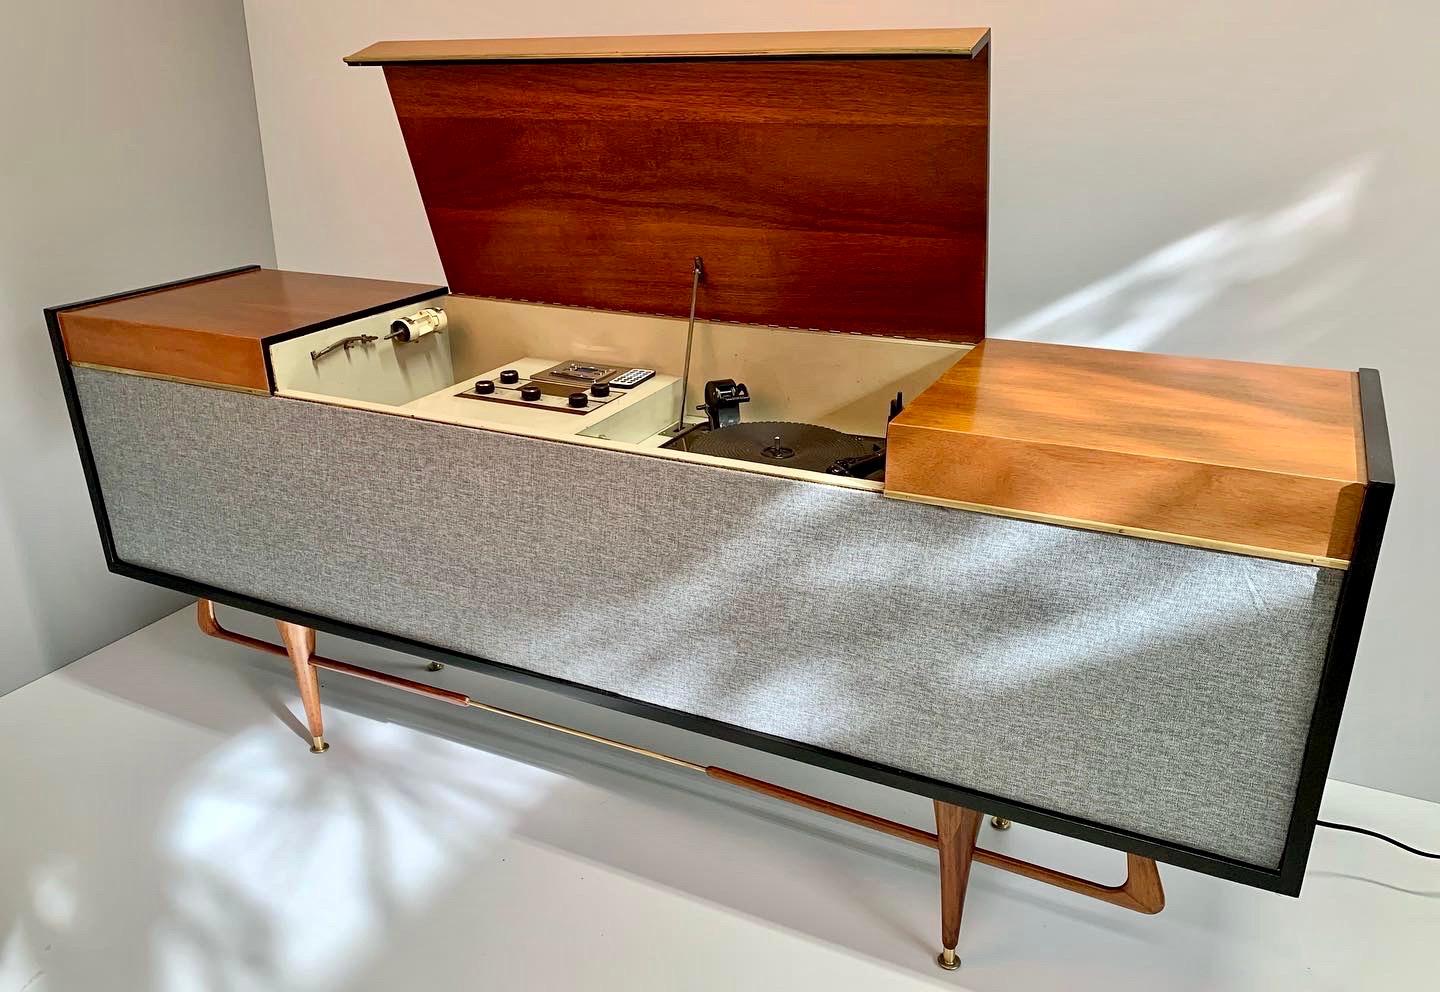 Spectacular midcentury console made in Mexico in the early 1960s, mahogany wood with brass details. We added new Bluetooth audio equipment as the original system we believe does not work. The entire exterior was professionally restored.